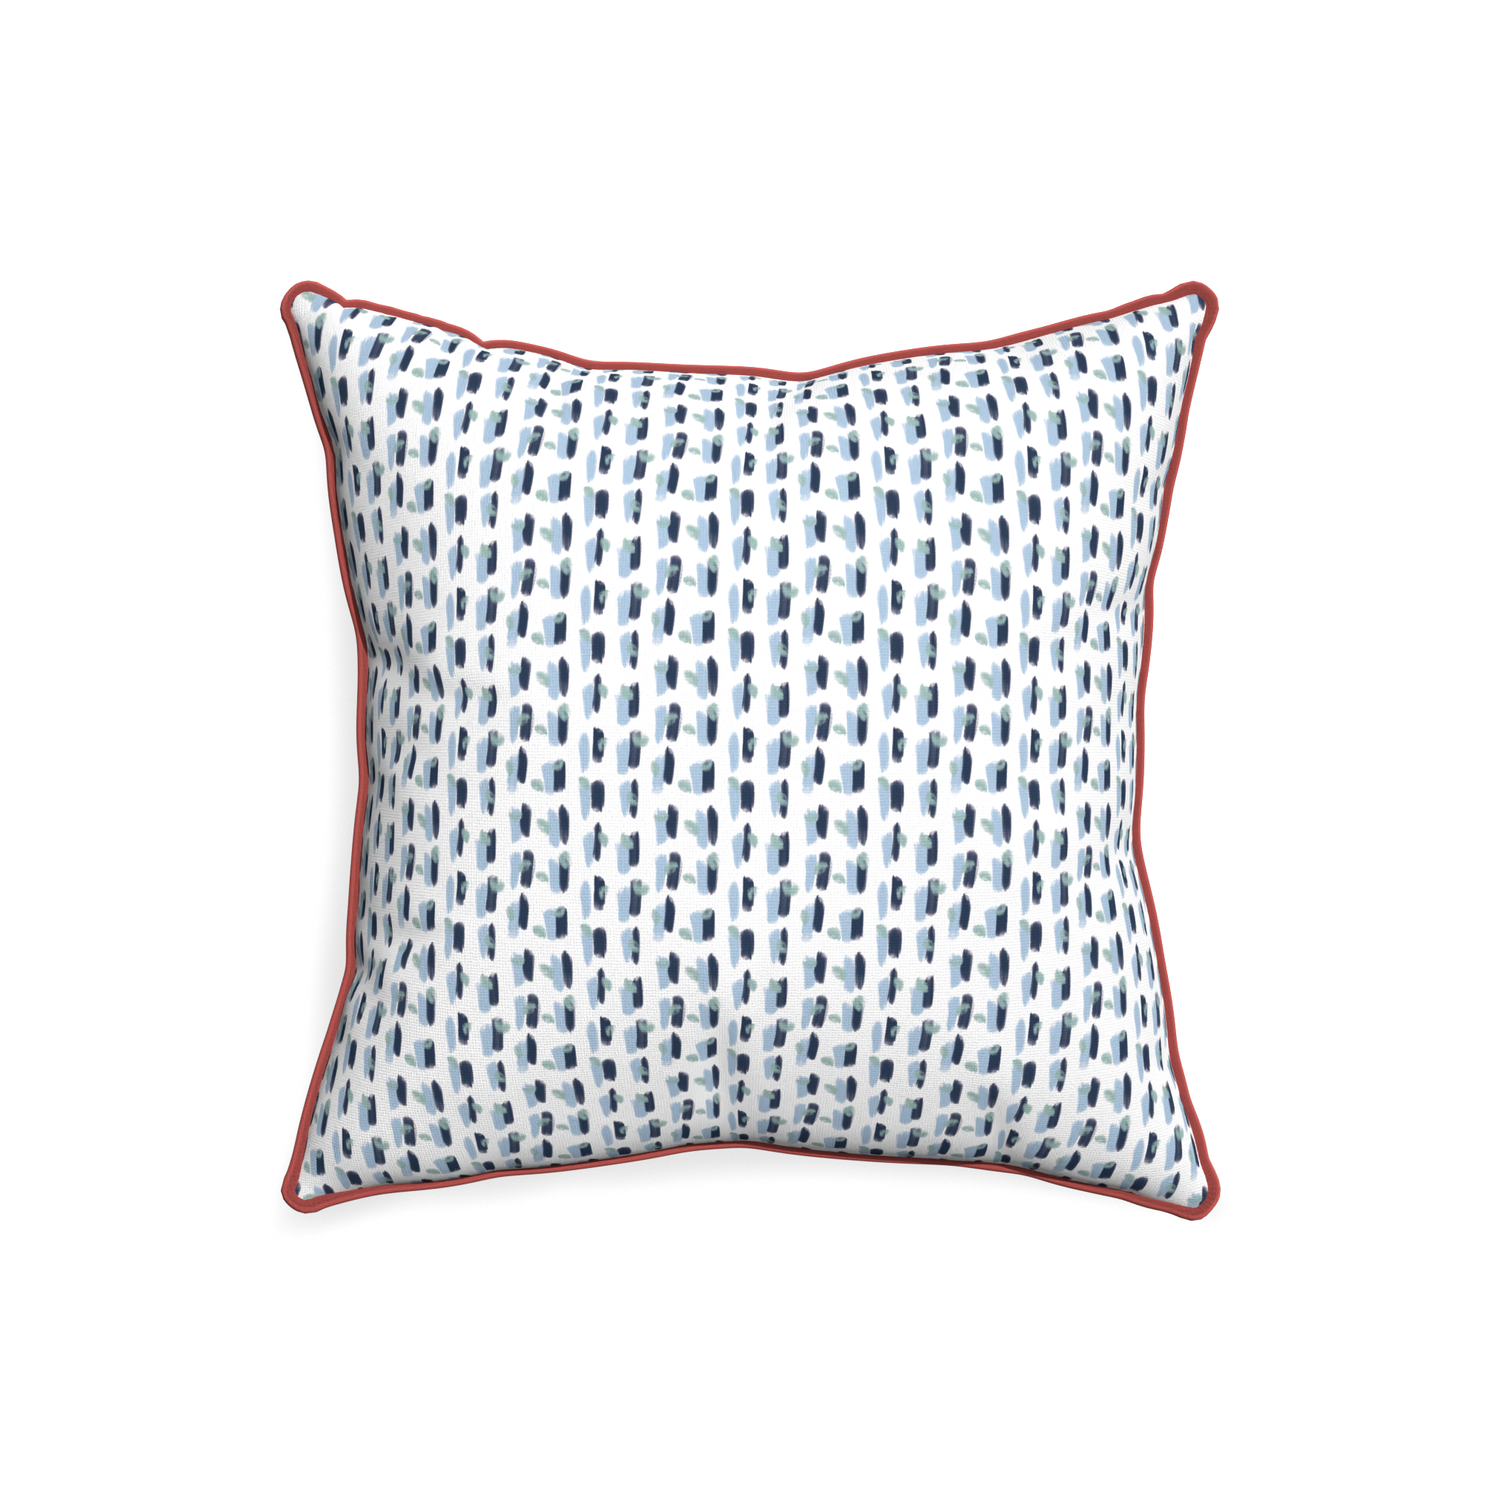 20-square poppy blue custom pillow with c piping on white background